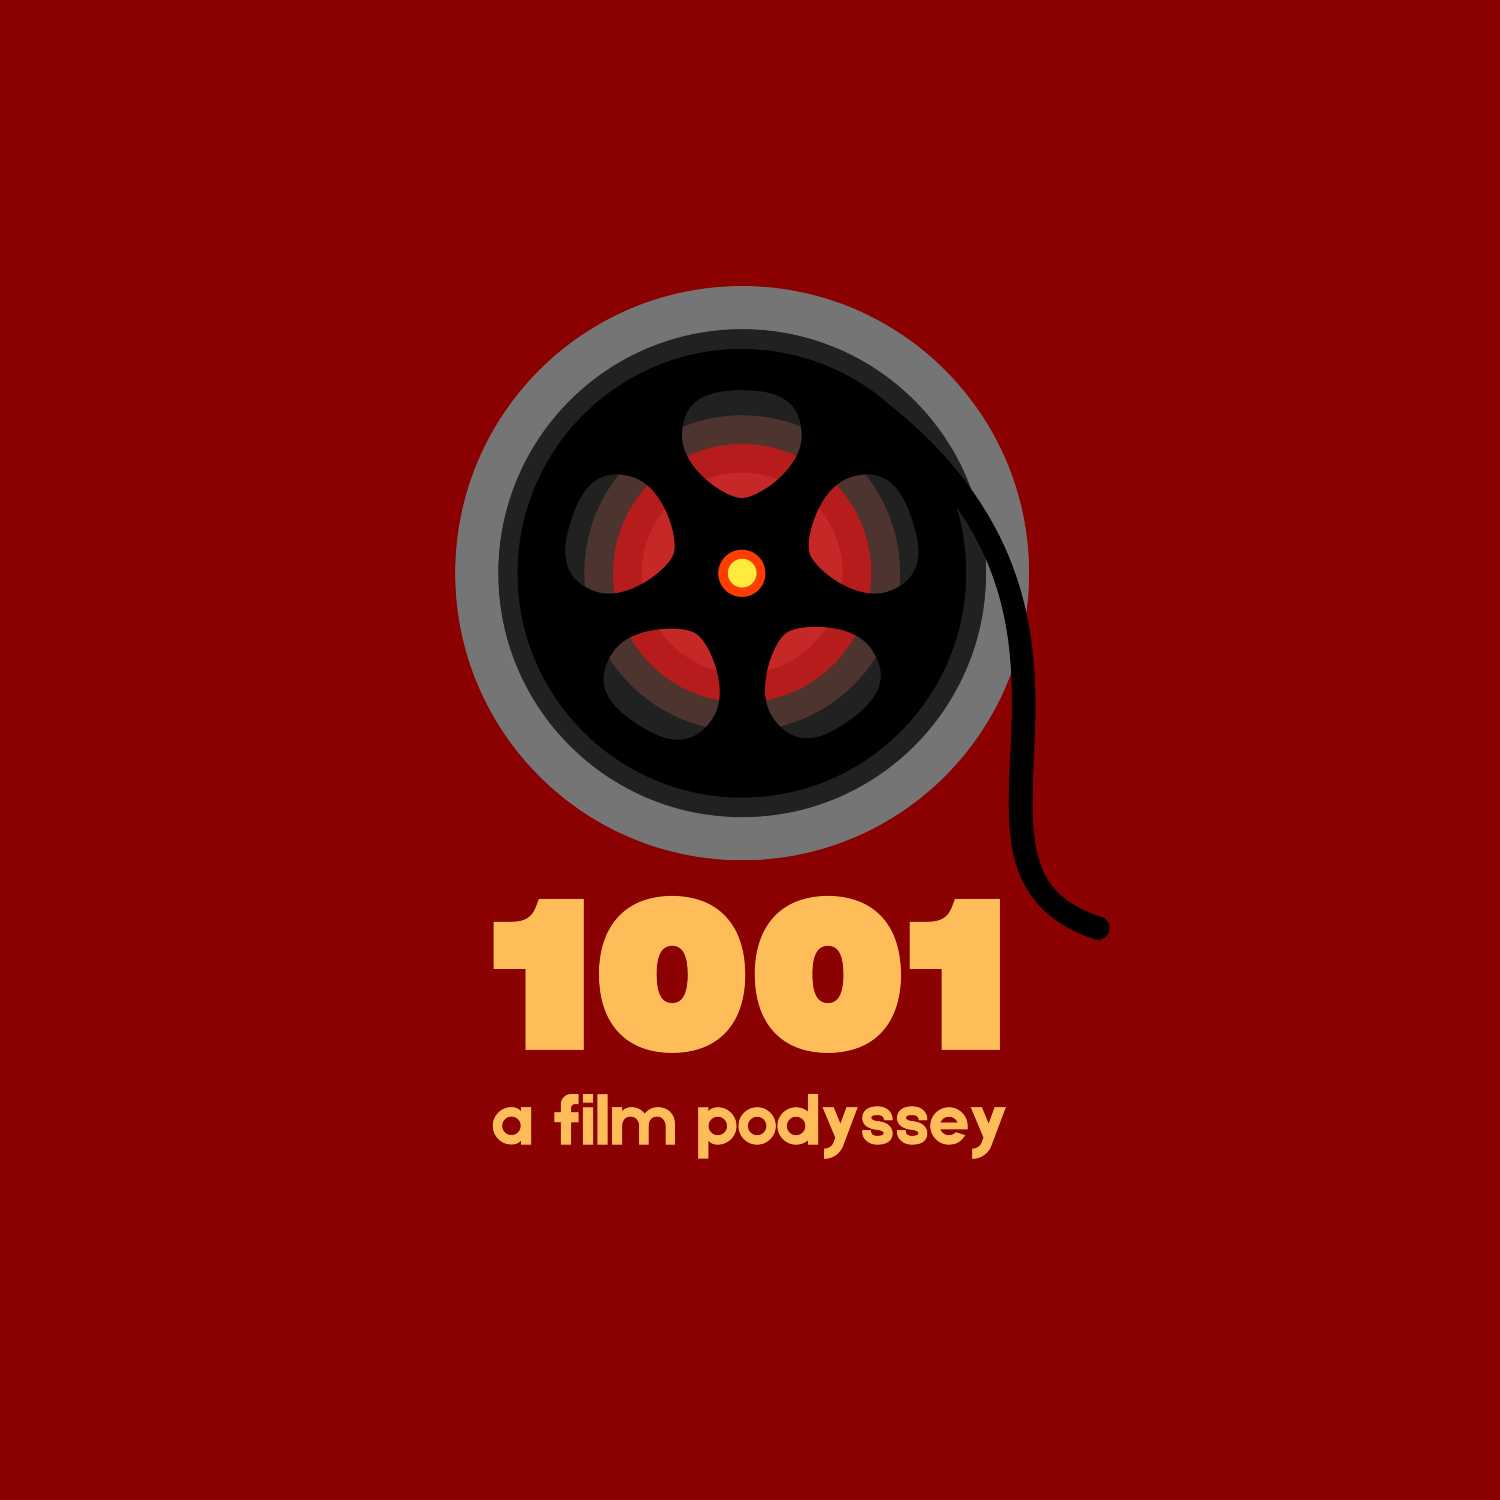 1001: A Film Podyssey | Rebel Without a Cause (1955)